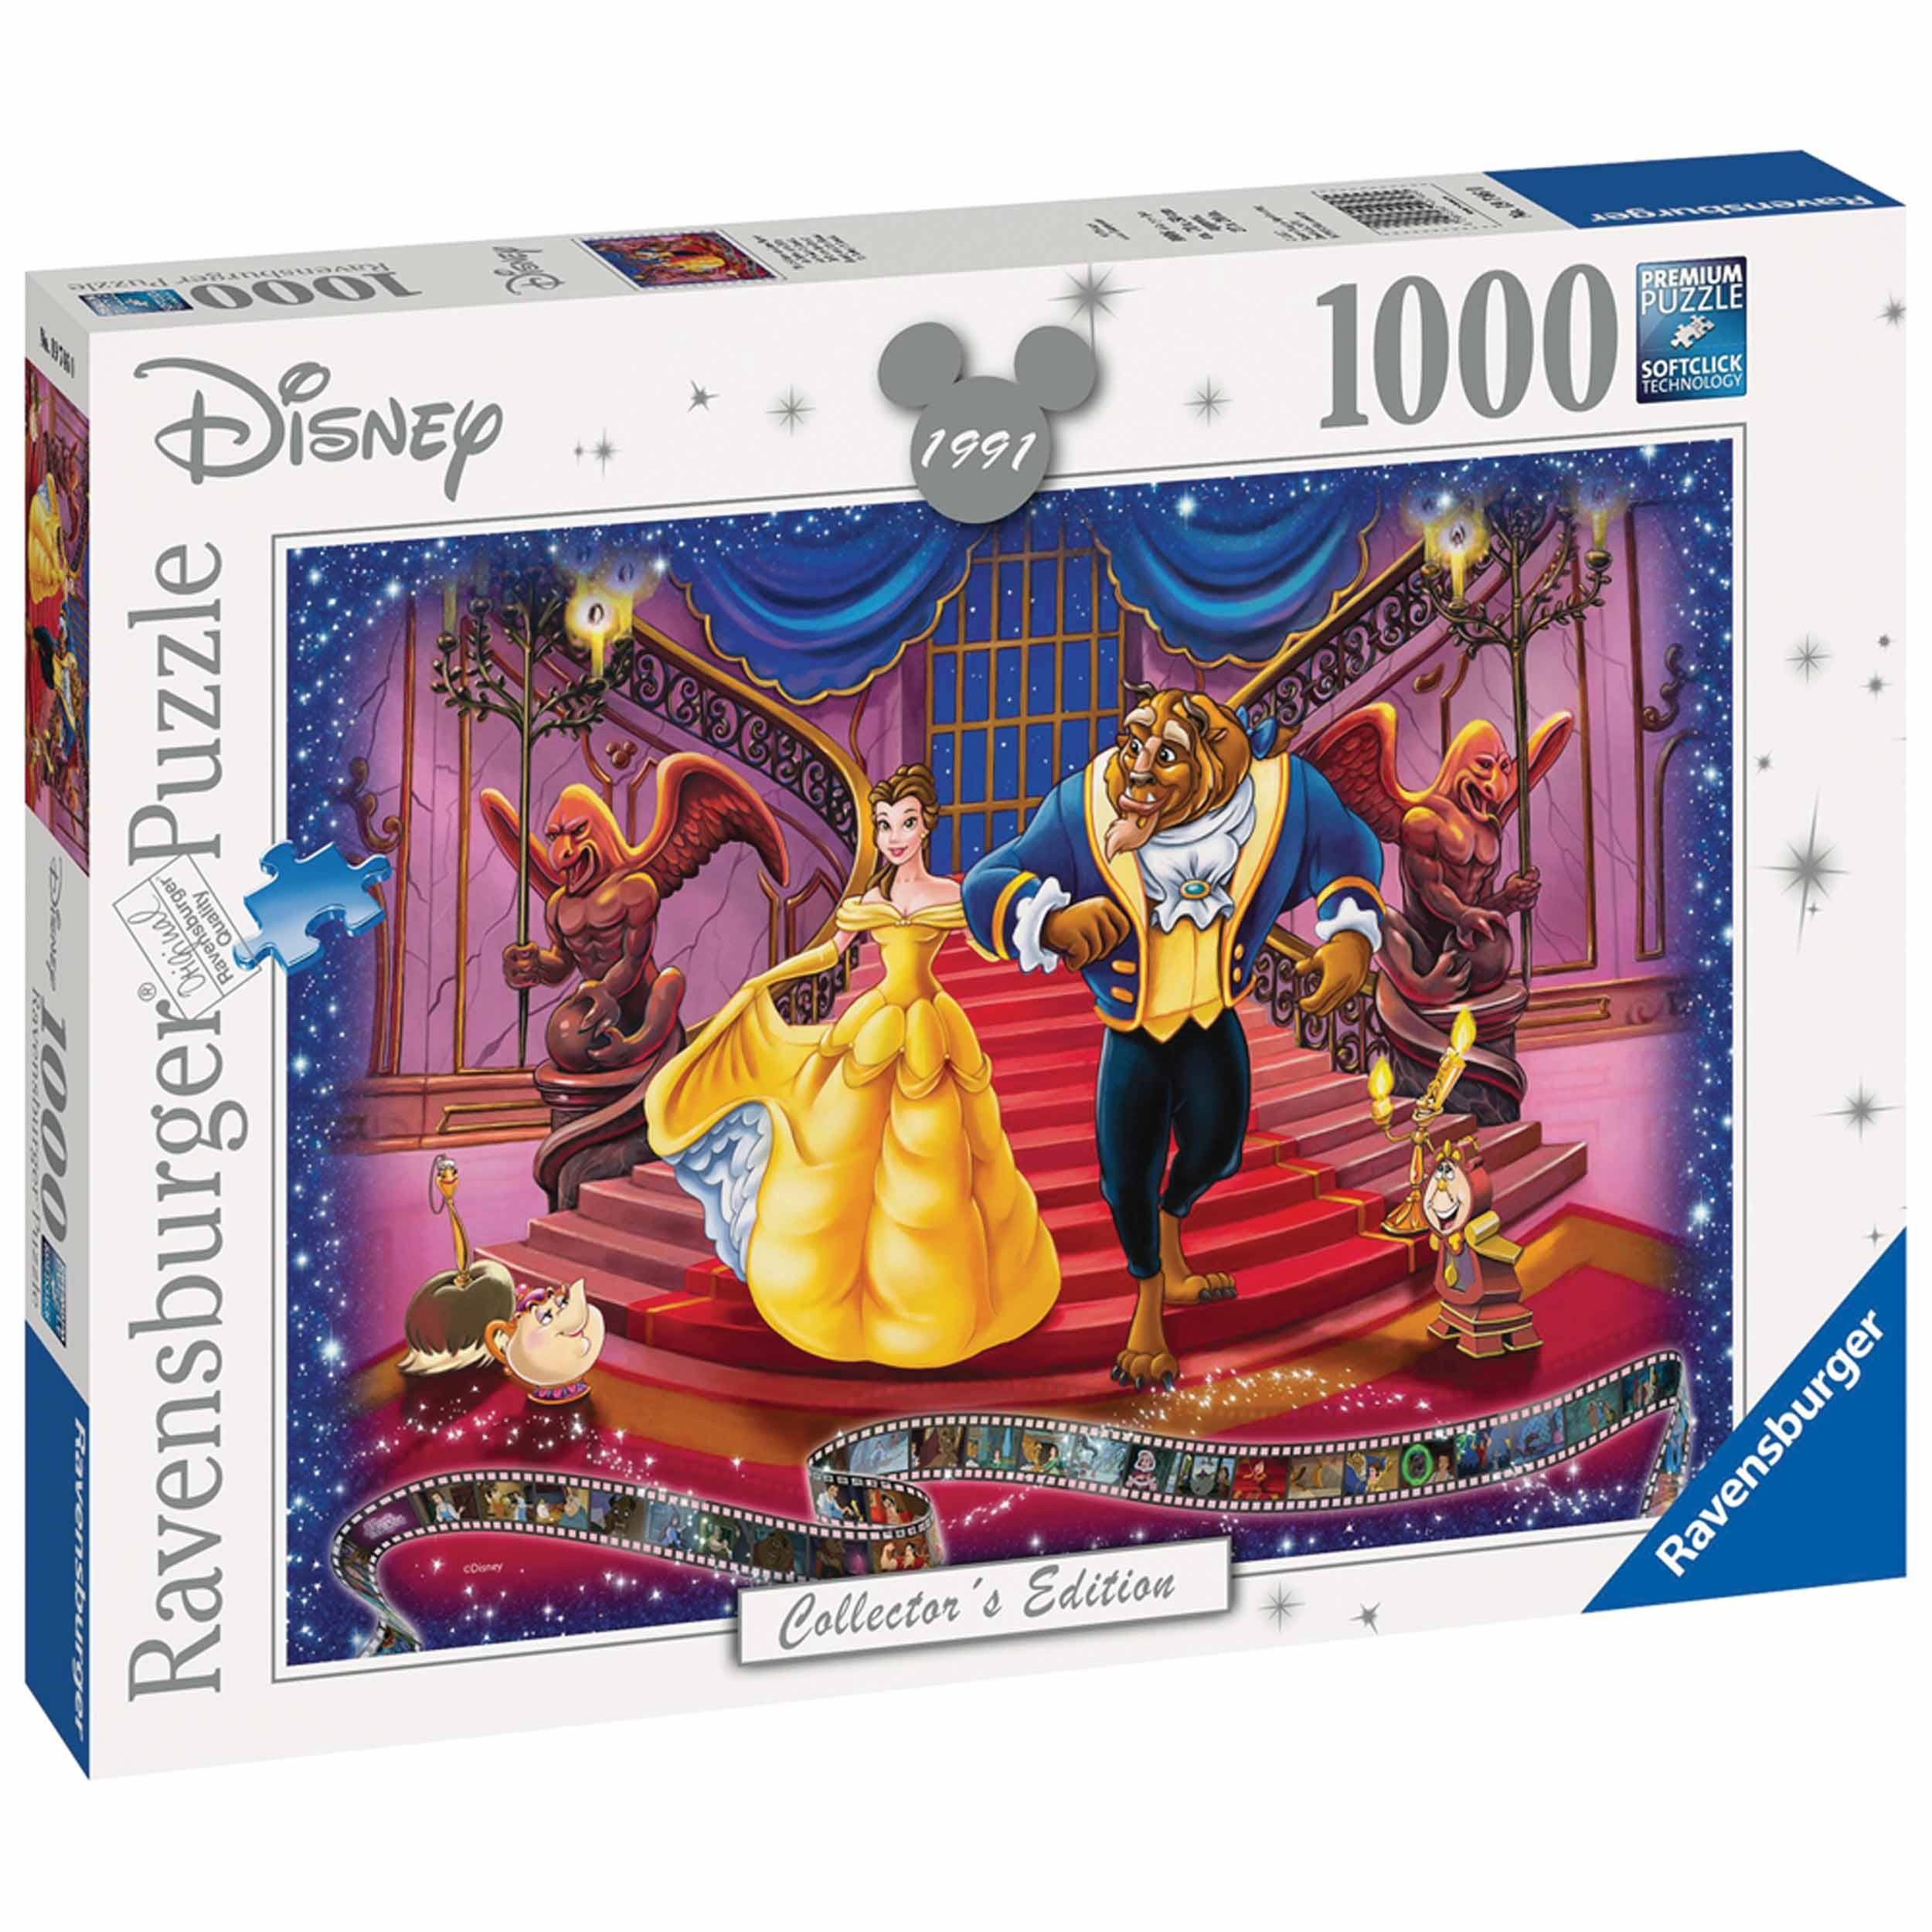 Ravensburger Disney Memories Jigsaw Puzzle - Beauty and the Beast, 1000pc